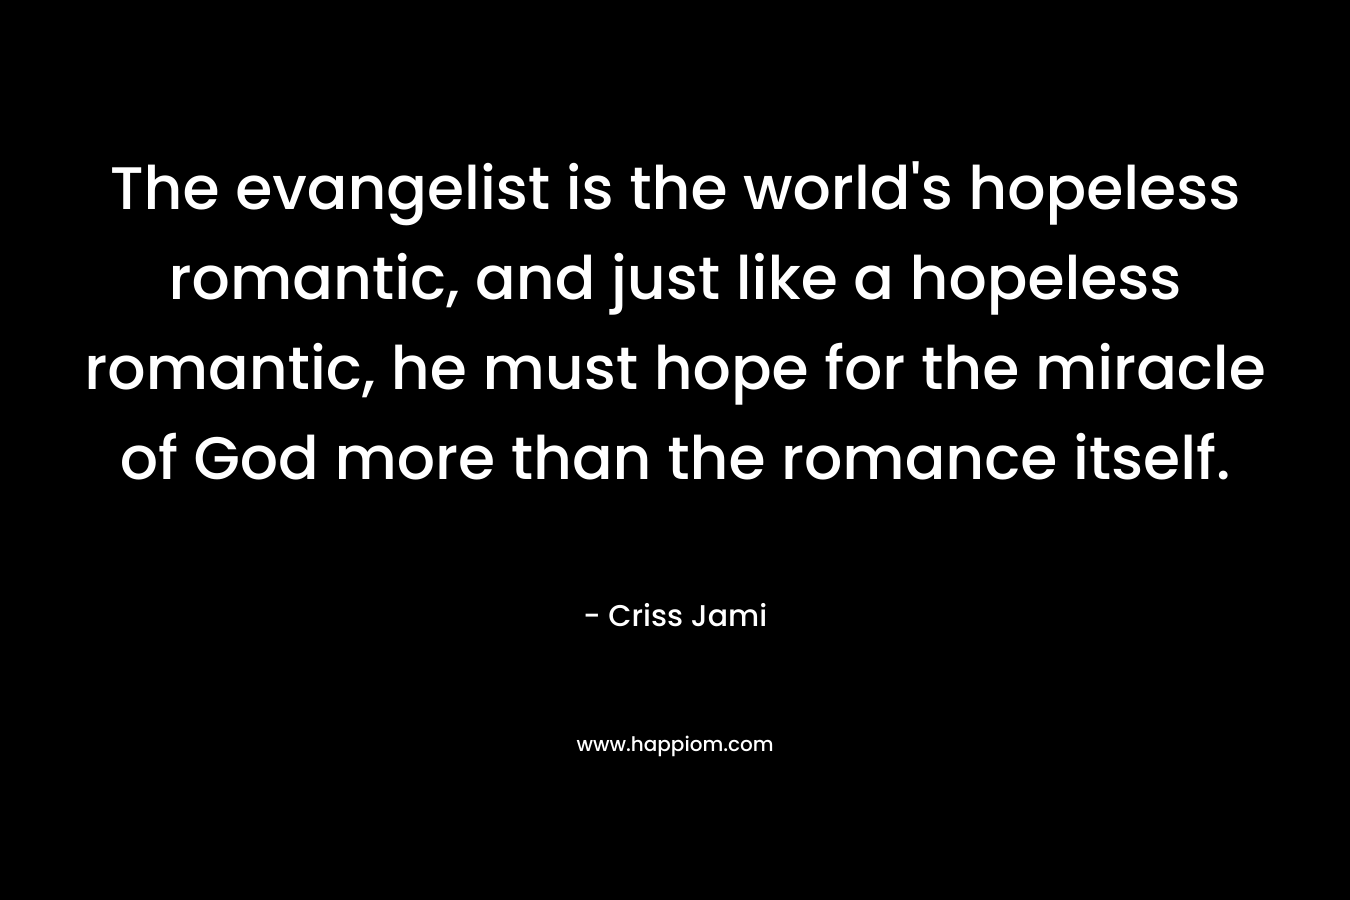 The evangelist is the world's hopeless romantic, and just like a hopeless romantic, he must hope for the miracle of God more than the romance itself.